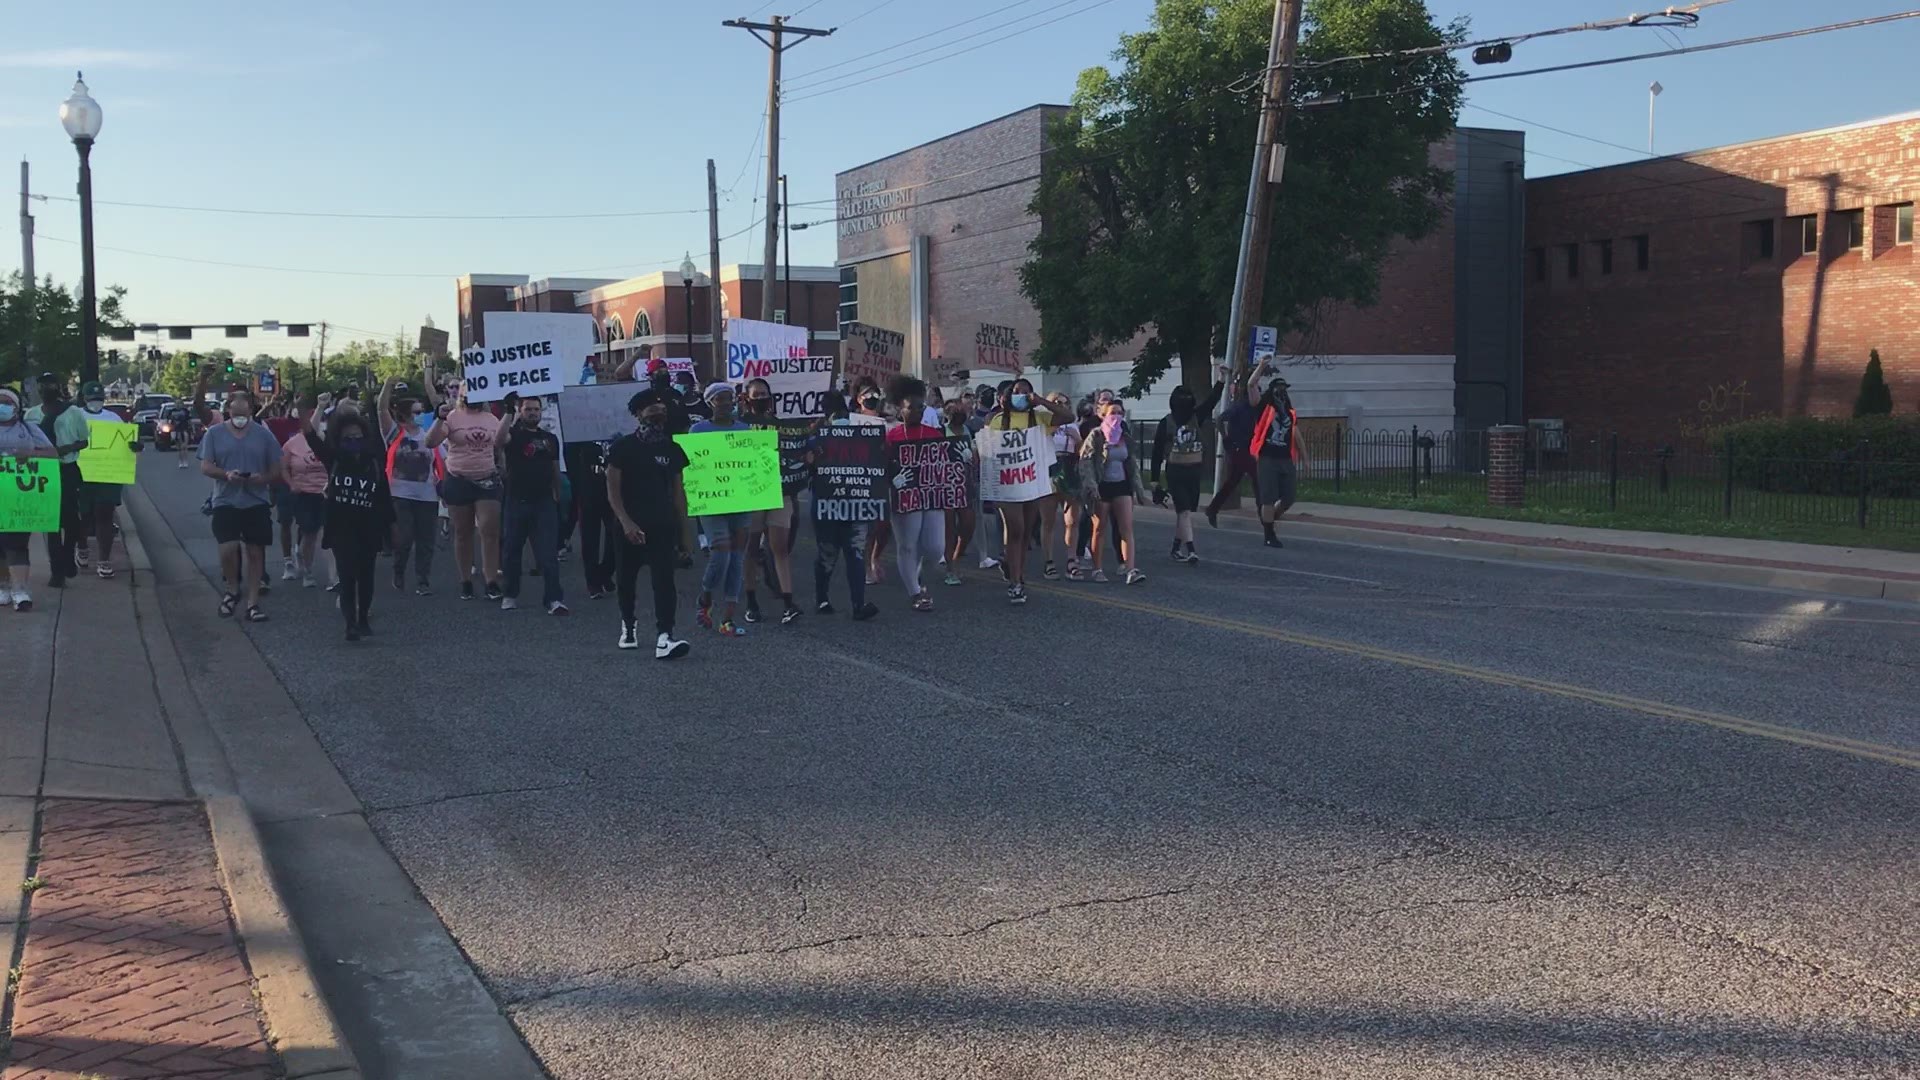 After chanting rallying cries like "Black lives matter" and “What’s his name? George Floyd,” protesters began marching down South Florissant Sunday evening.